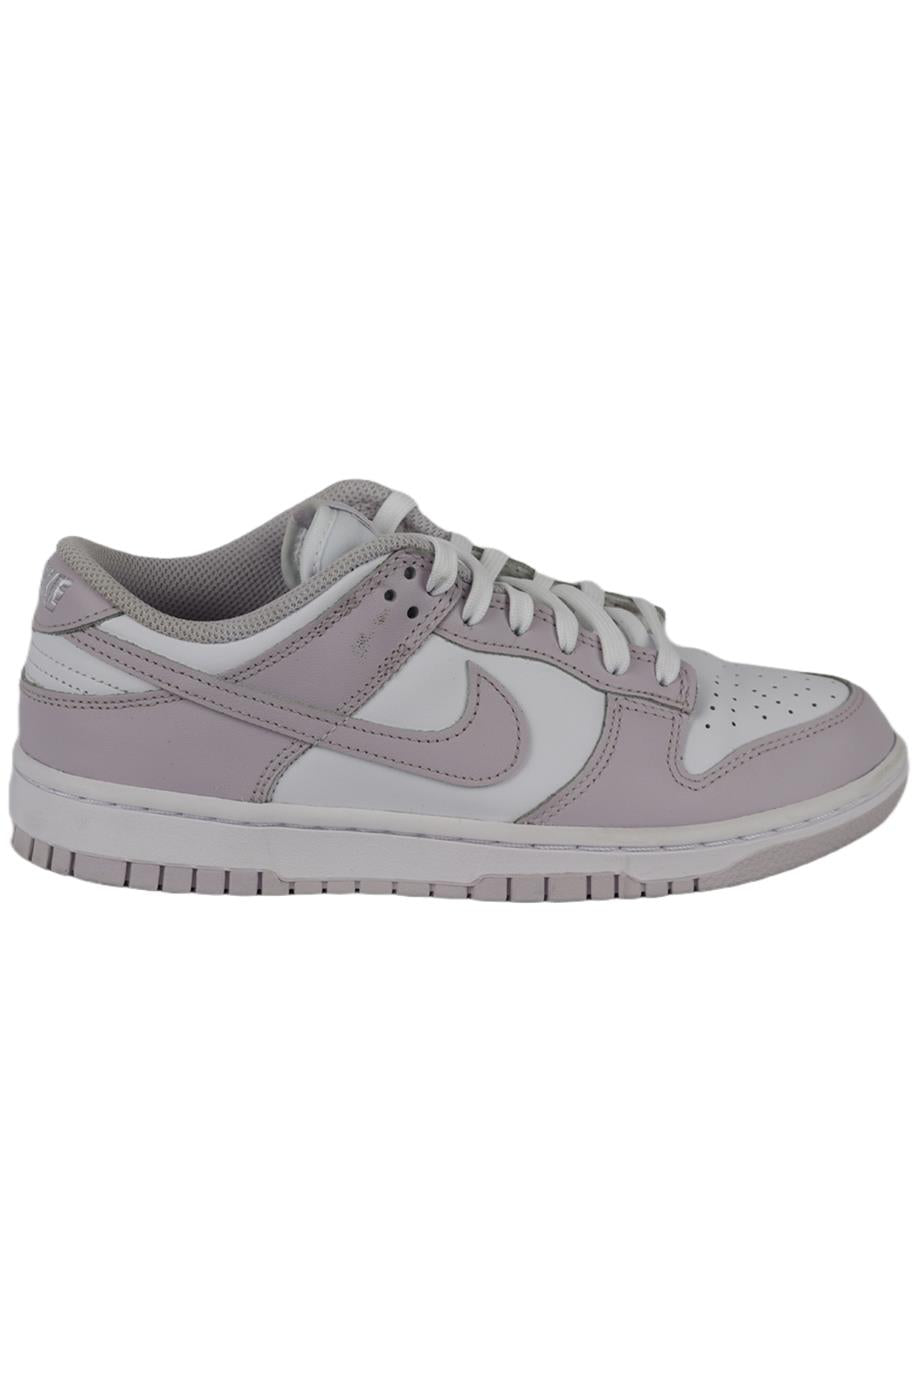 NIKE DUNK LOW LIGHT VIOLET LEATHER SNEAKERS EU 39 UK 5.5 US 8